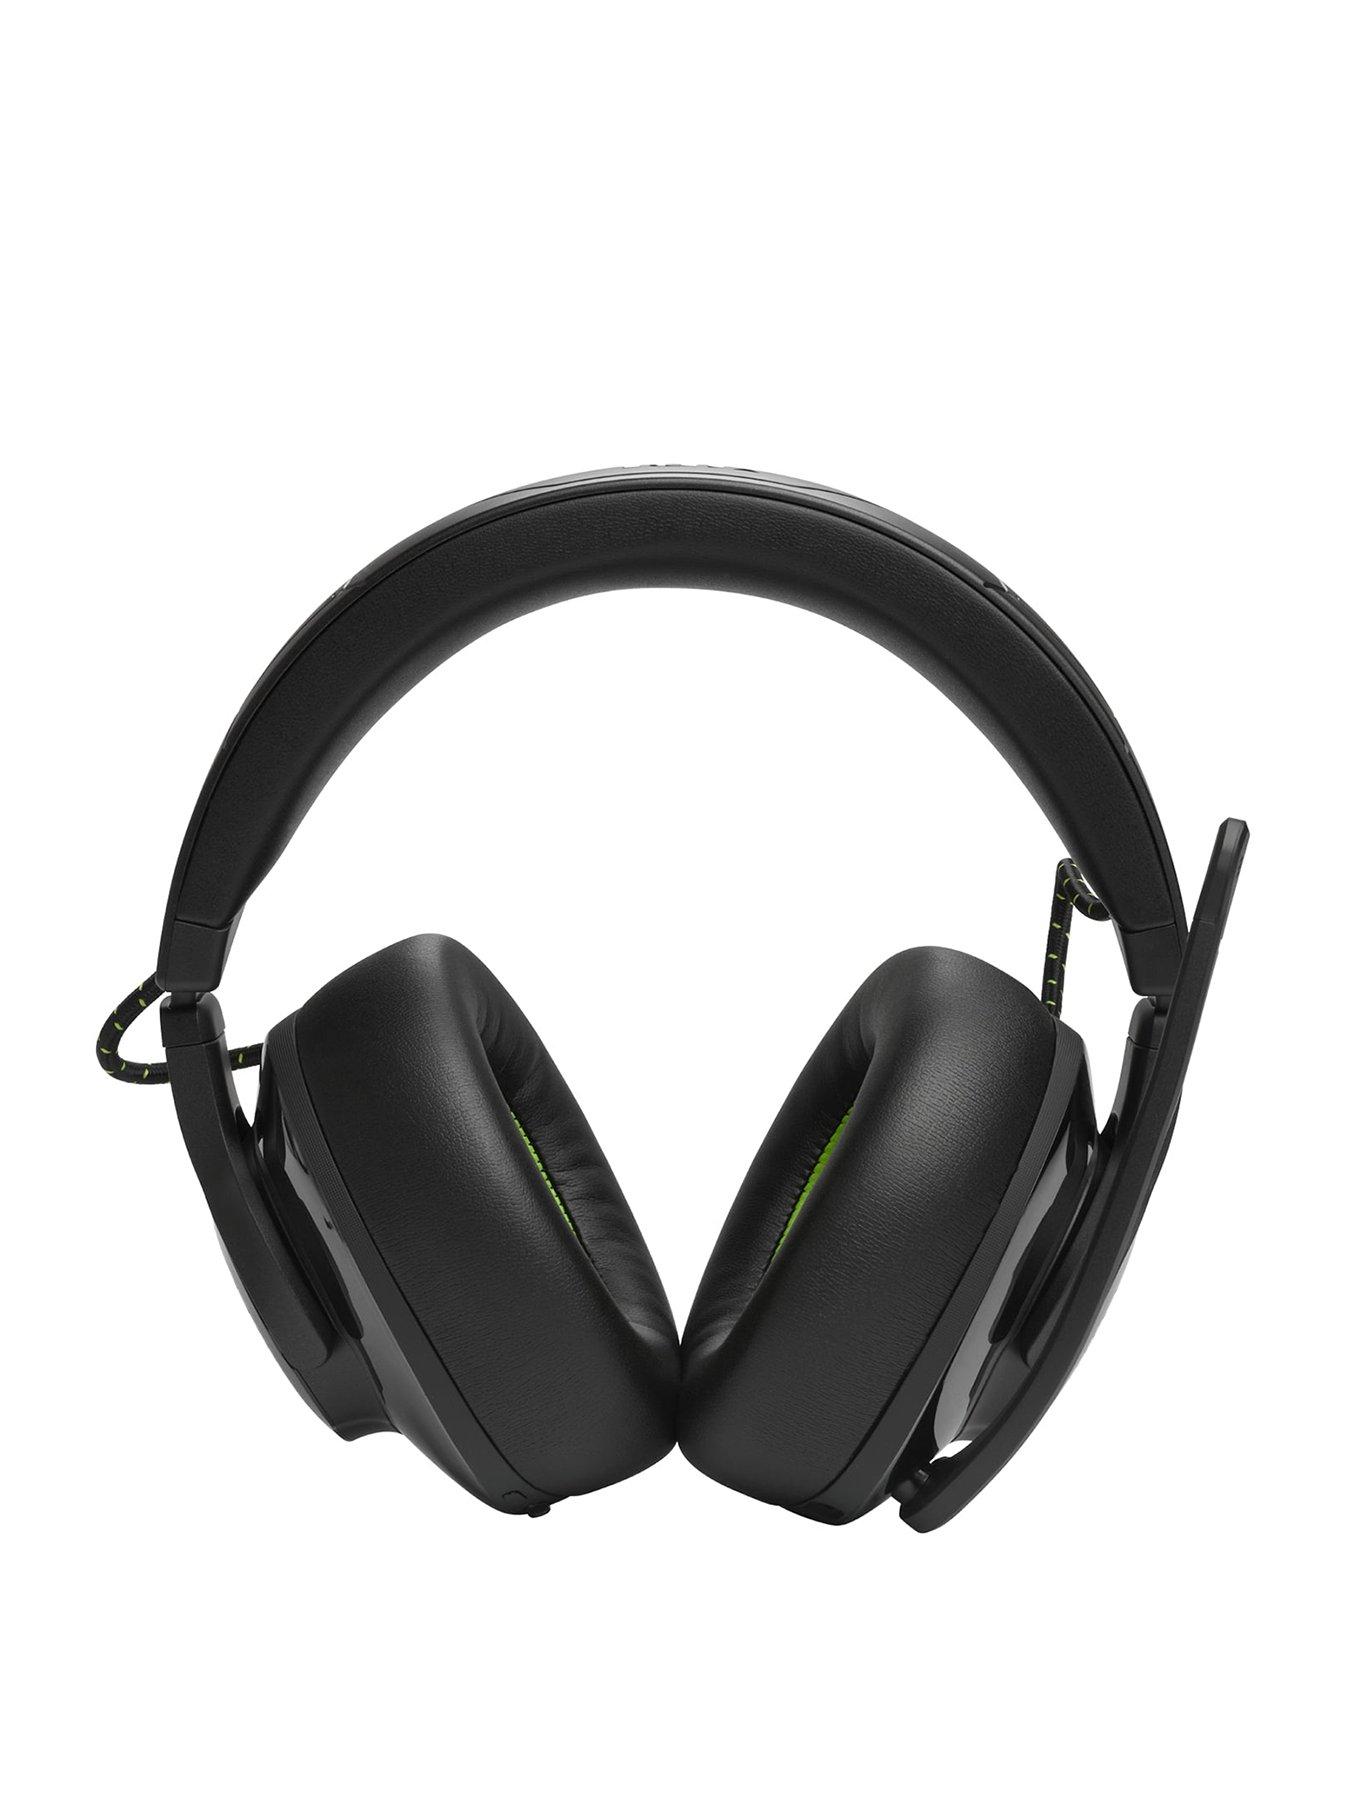 JBL's Quantum 910 Wireless headset delivers immersive in-game